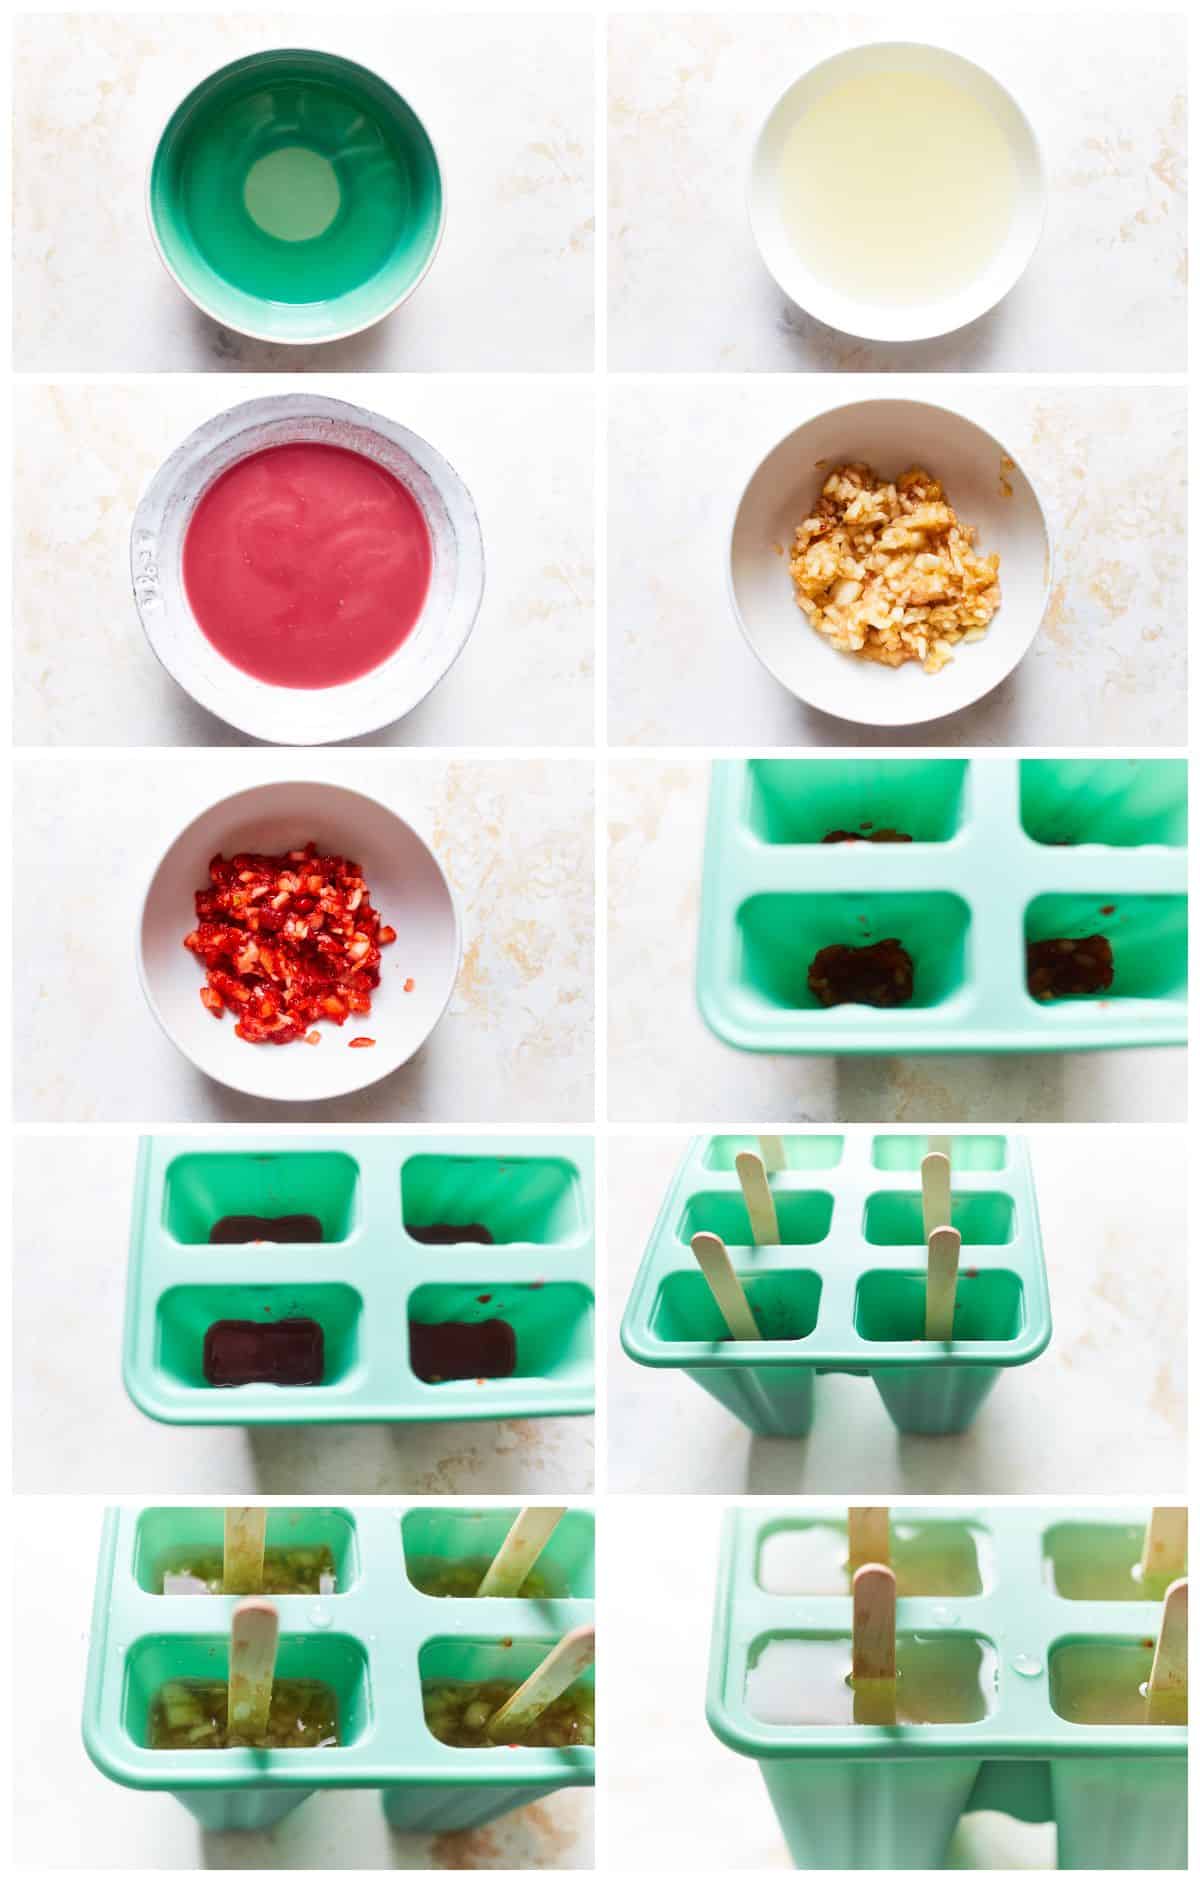 how to make popsicles at home, step by step photos